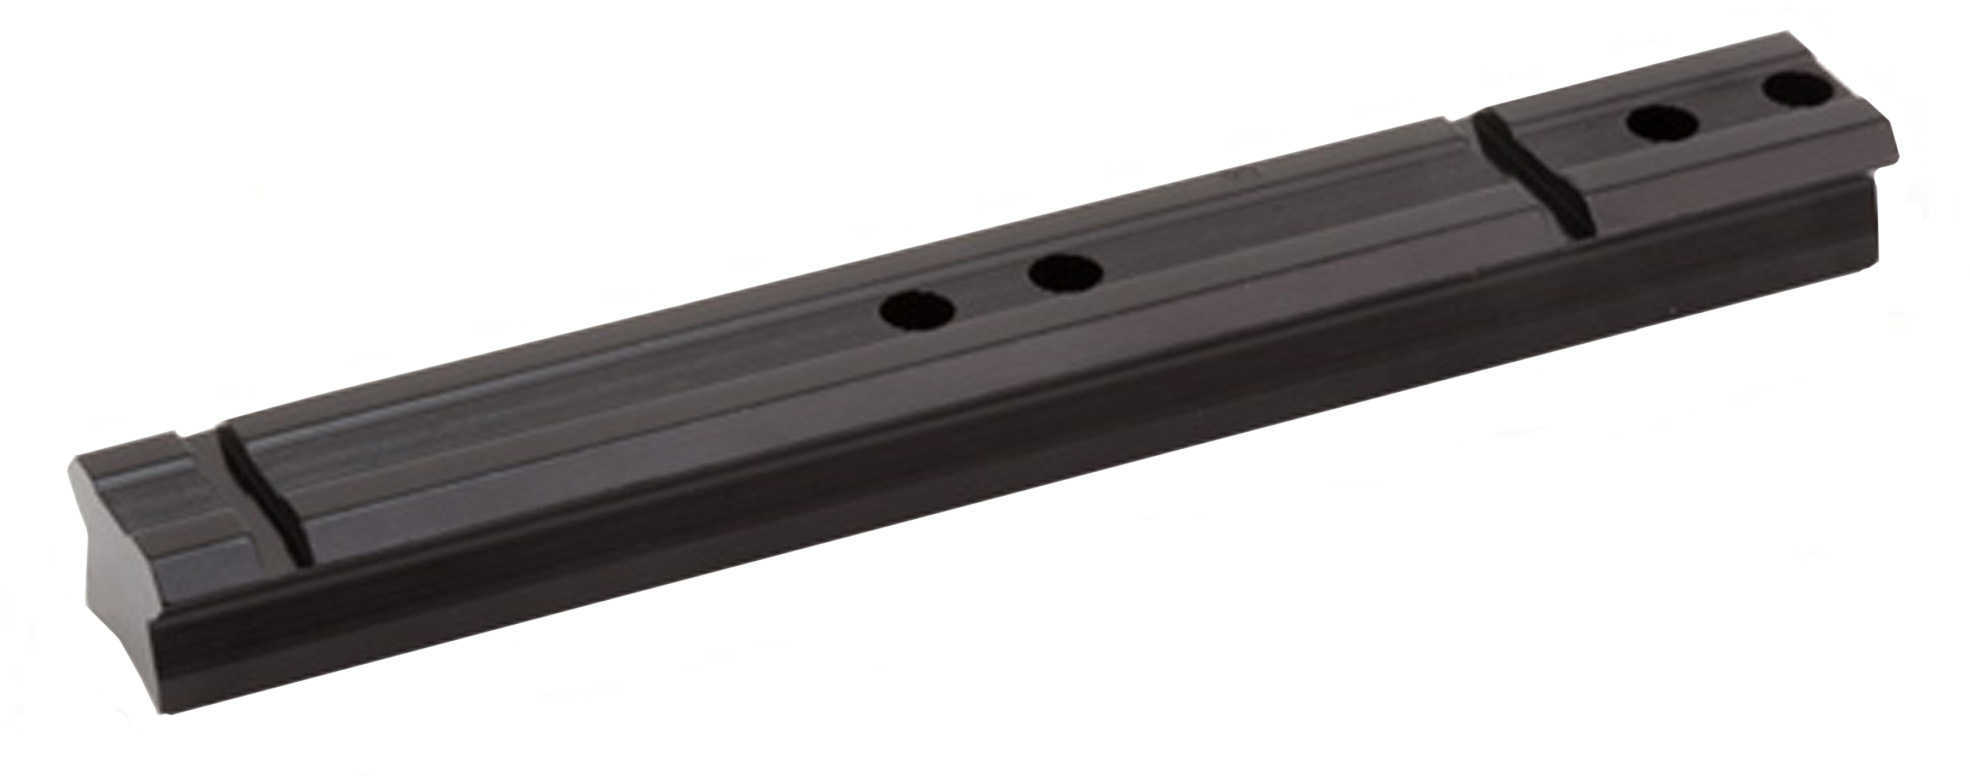 Weaver Model #88 Detachable Top Mount 1 Piece Base Fits Mossberg 500AS 600 Gloss Finish 48088